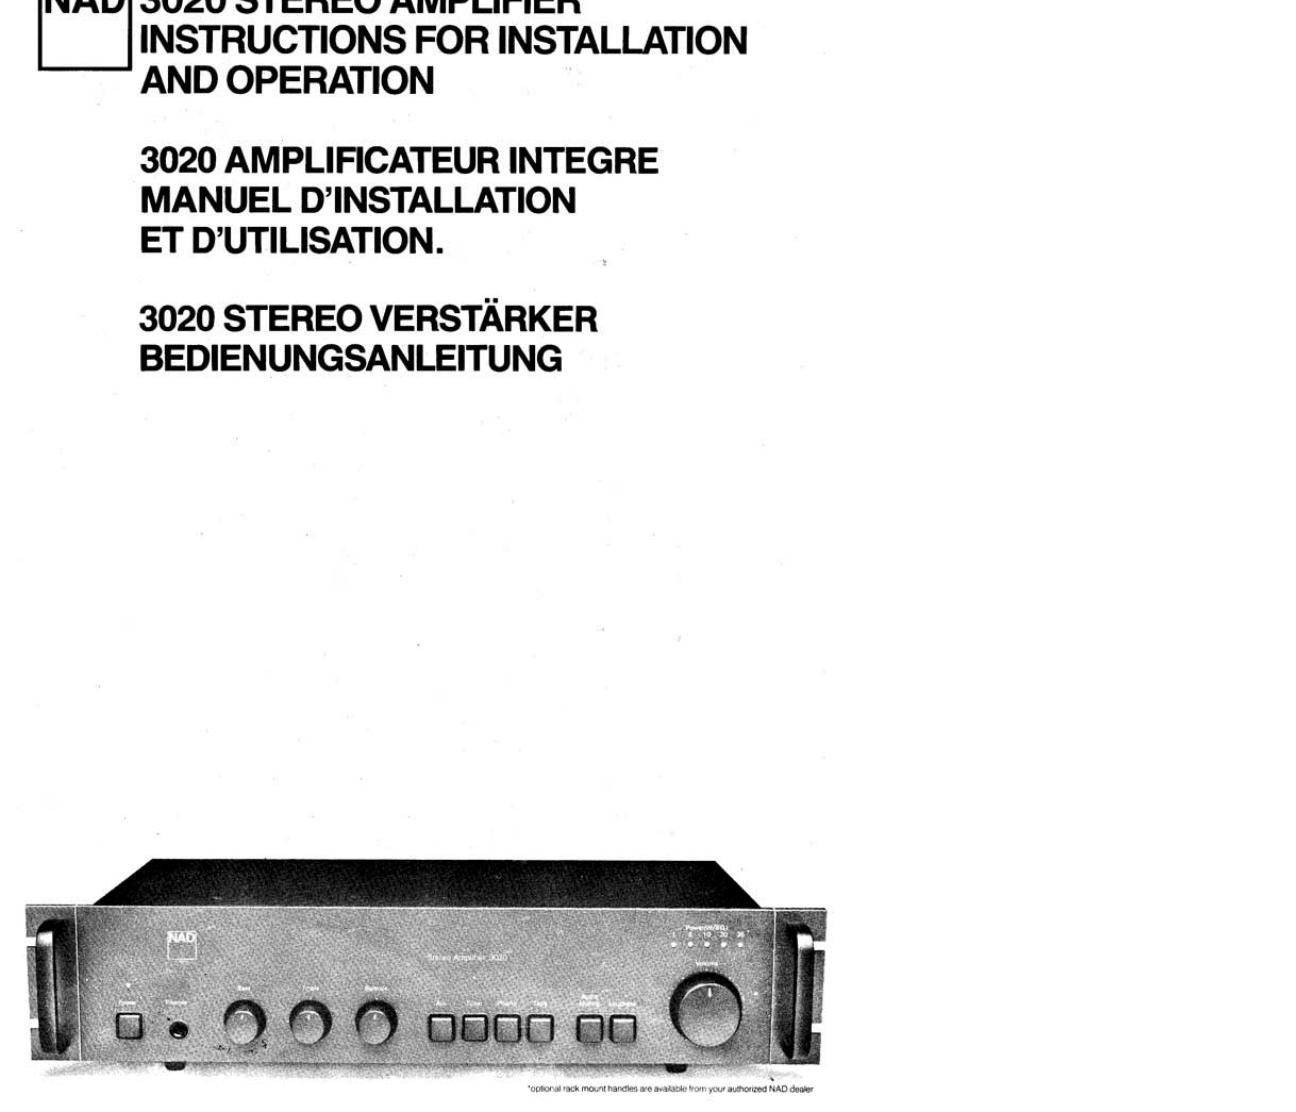 Nad 3020 Owners Manual 1